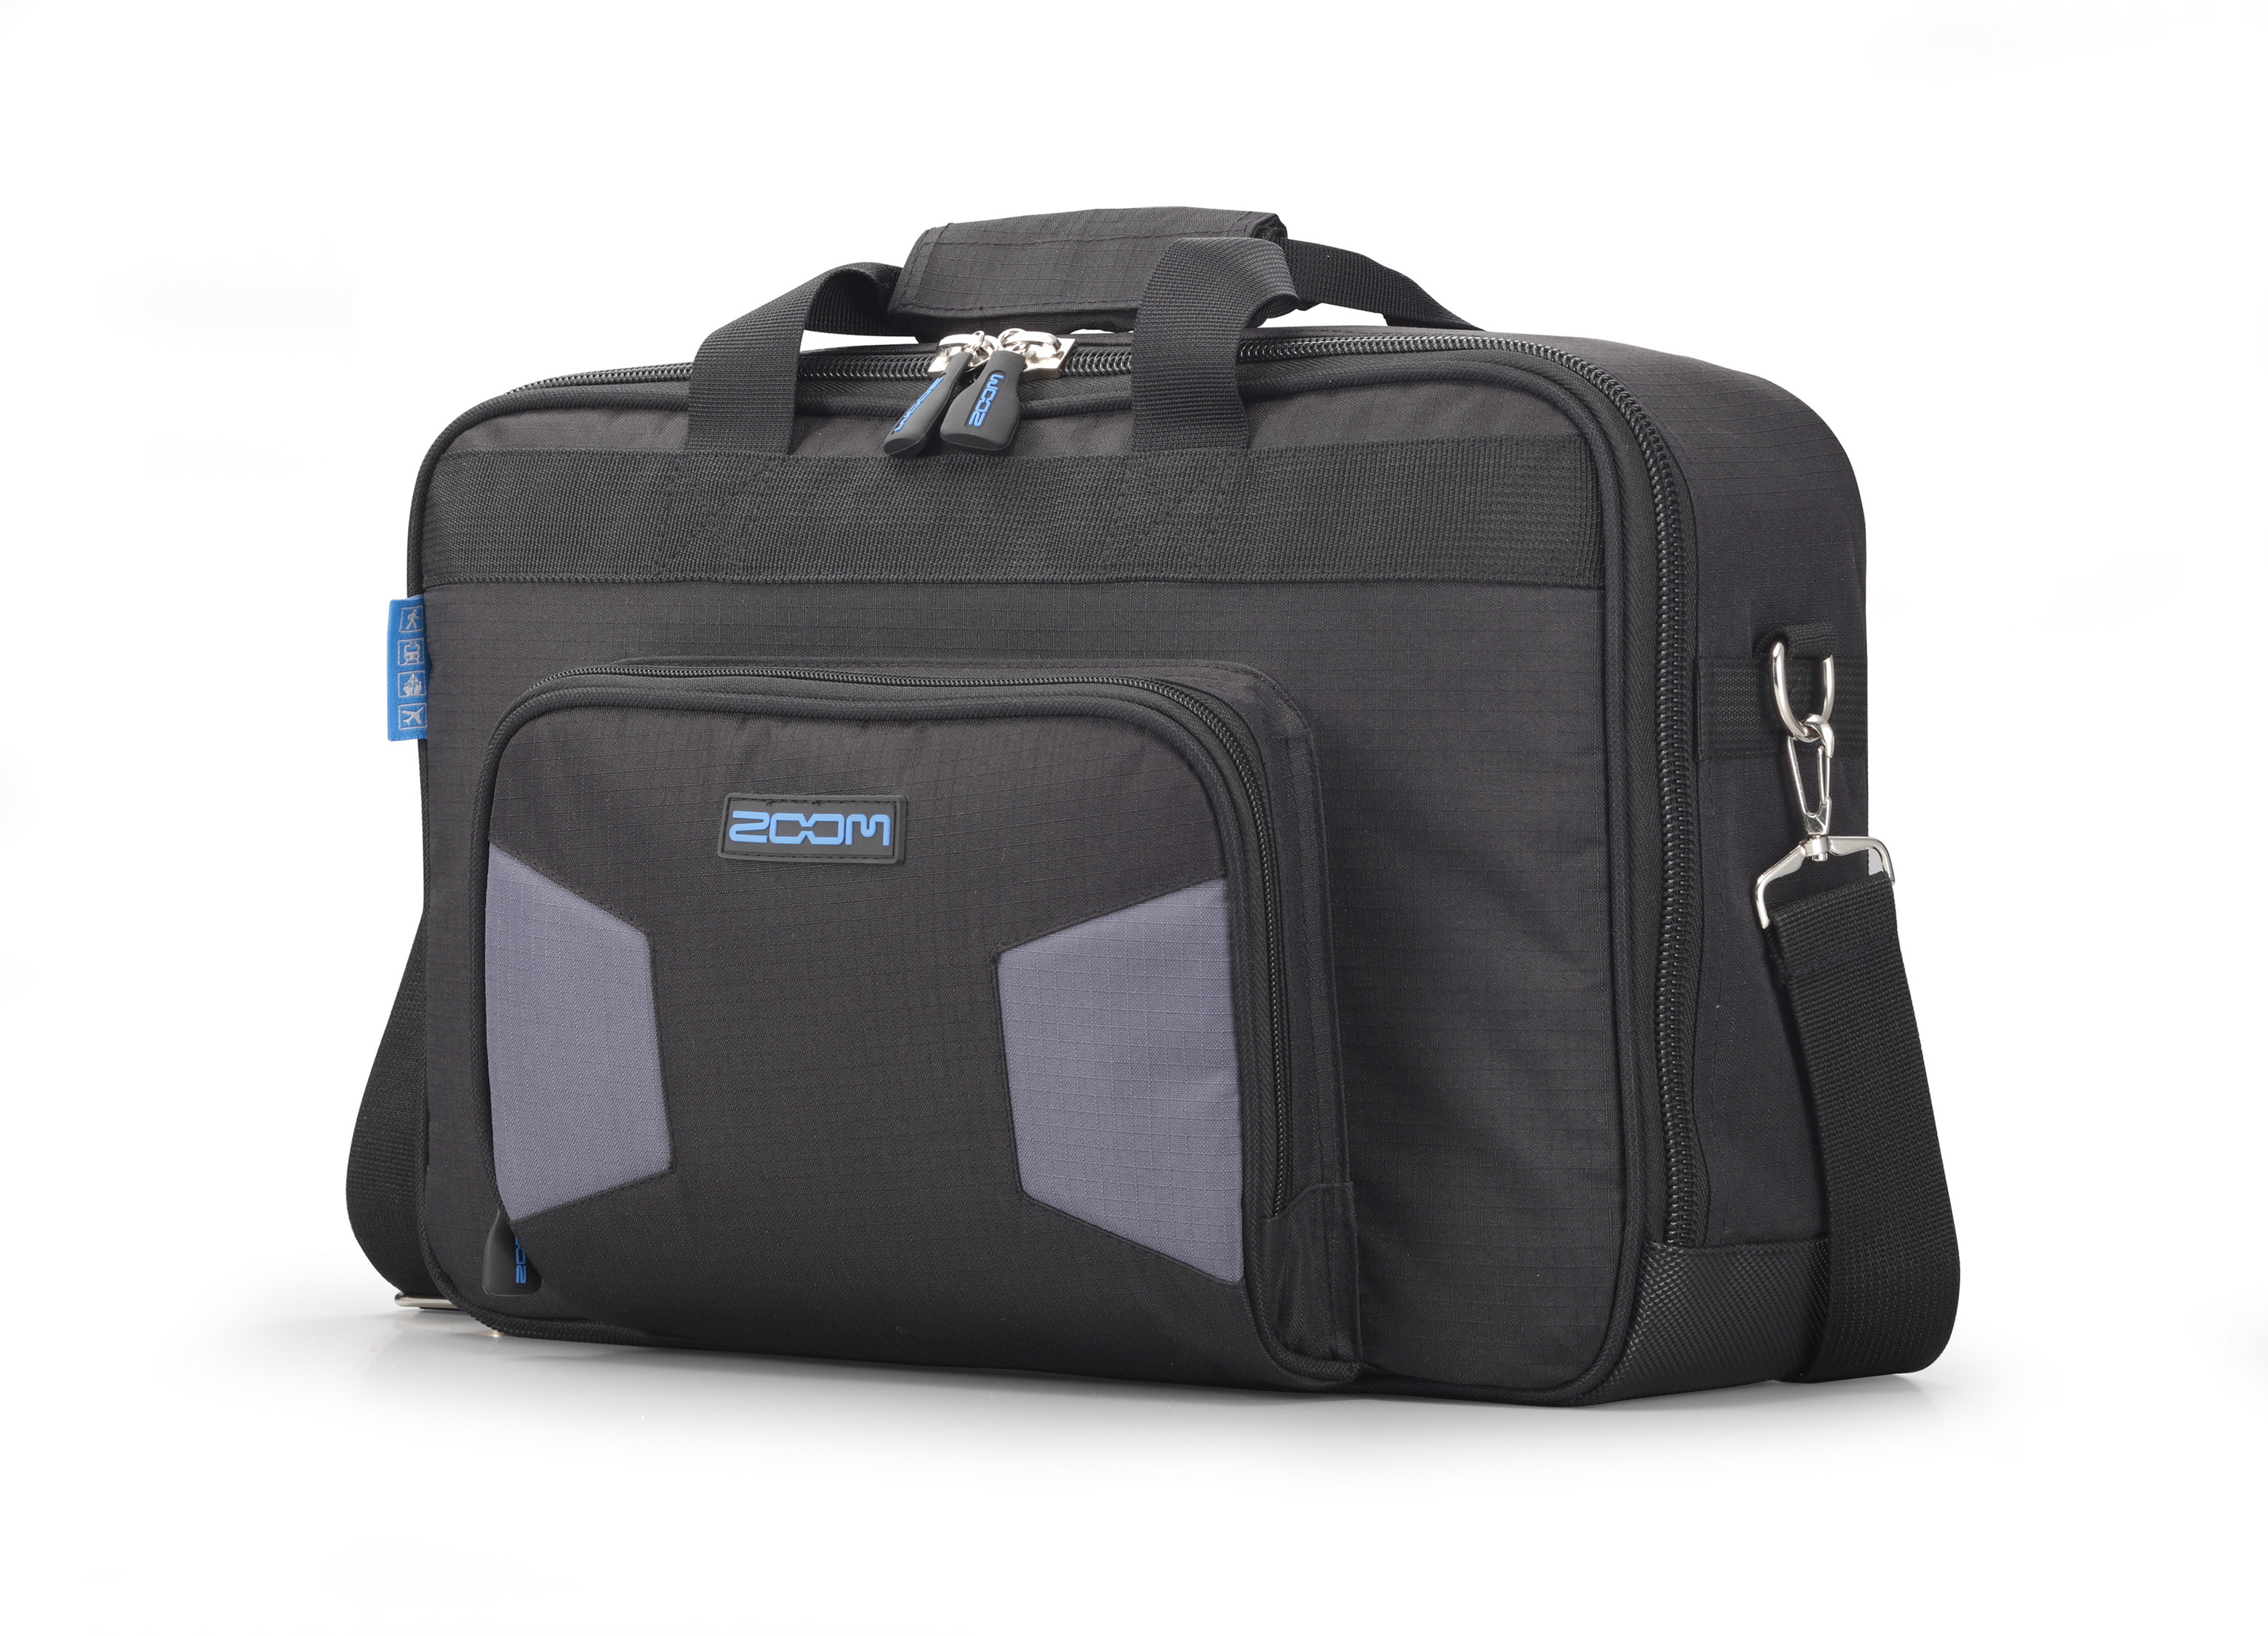 Zoom CBR-16 Carrying Case for R16 and R24 